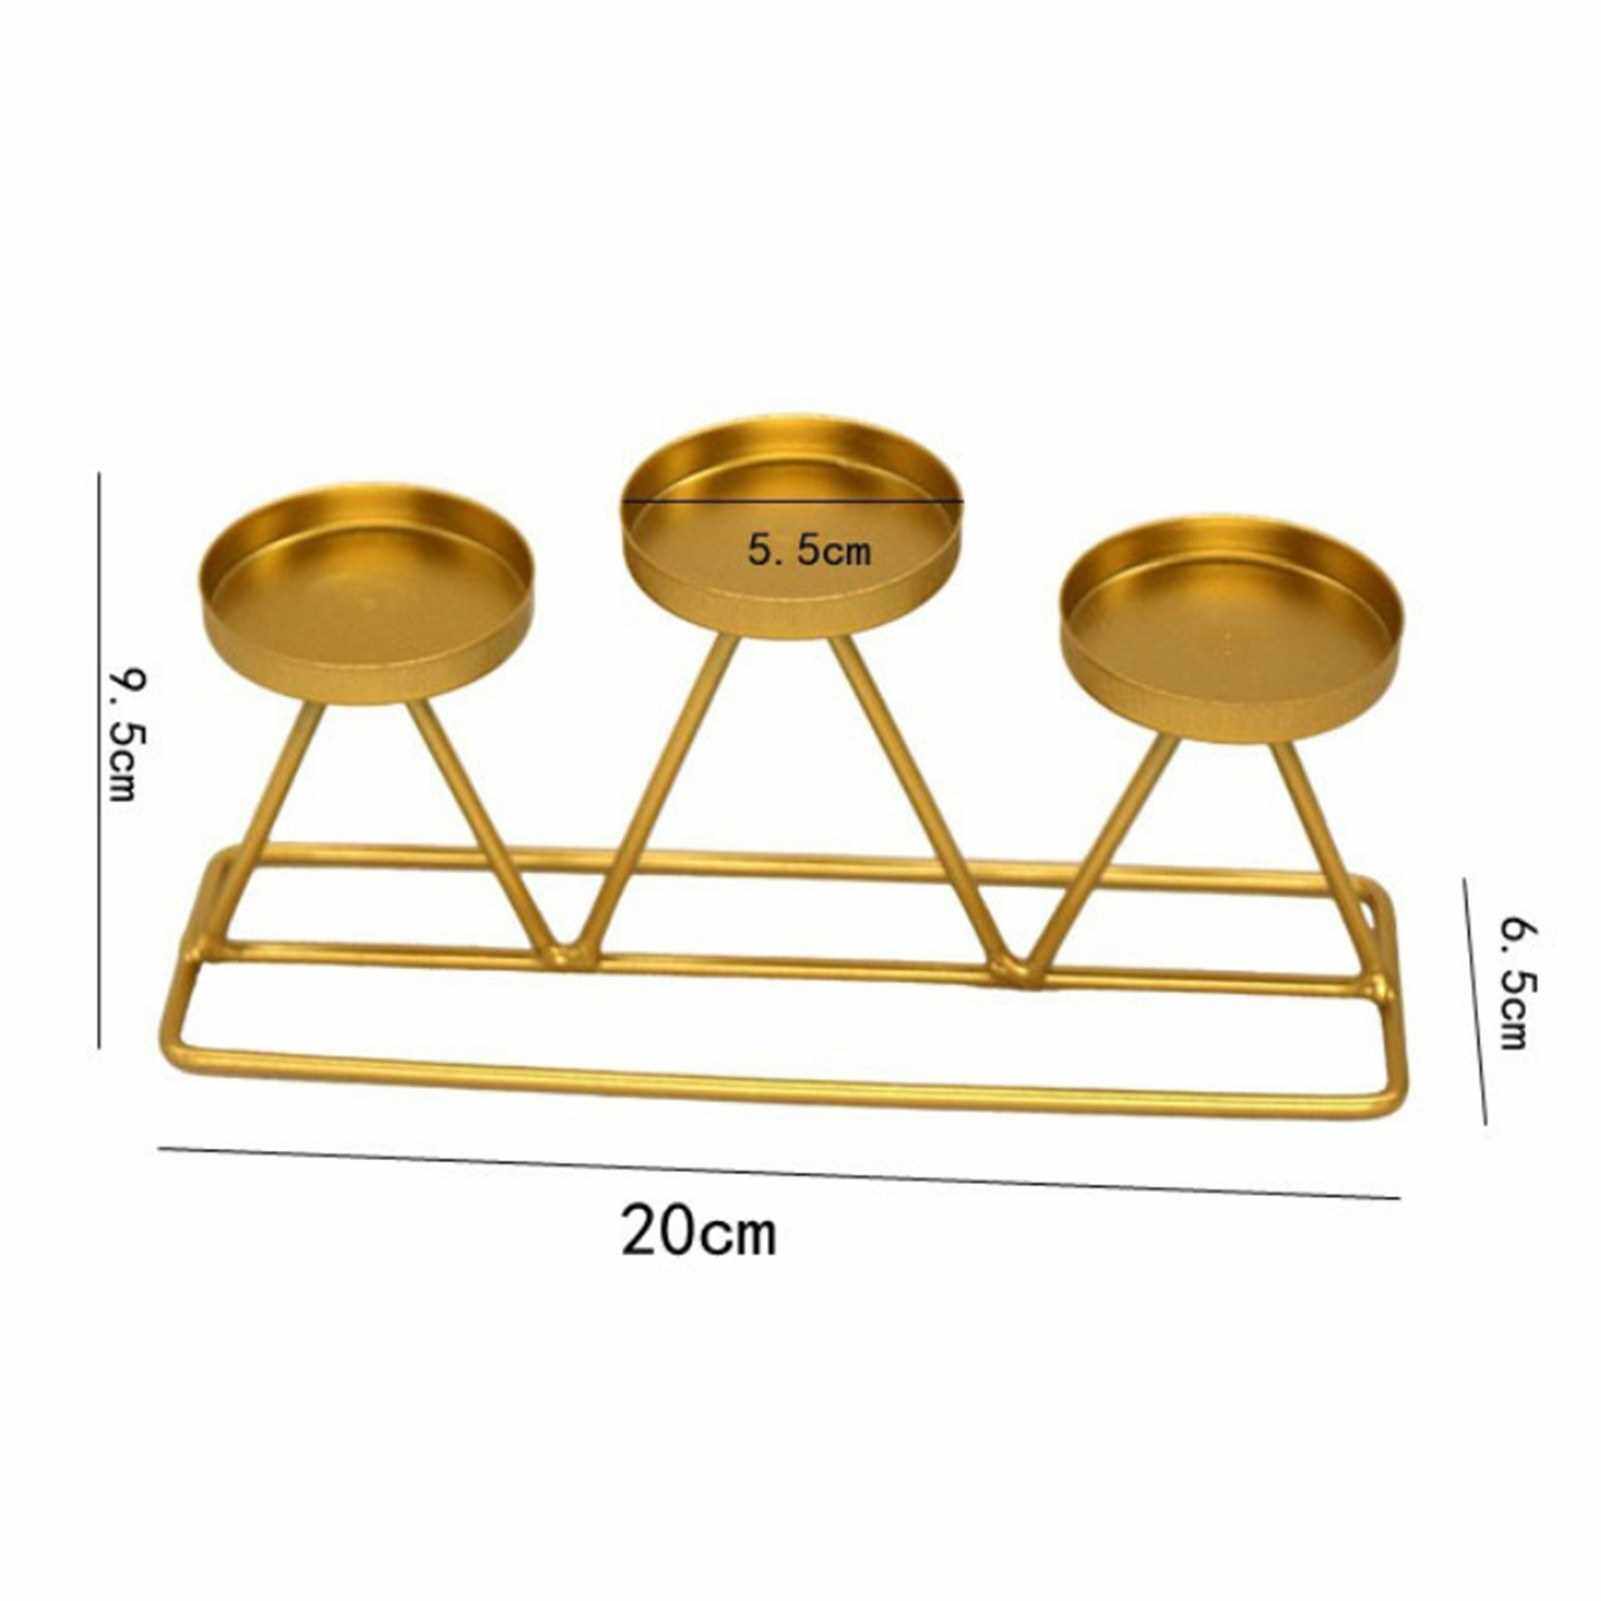 People's Choice Three Heads Candlestick Display Romantic Home Party Wedding Decor Gift (Gold)